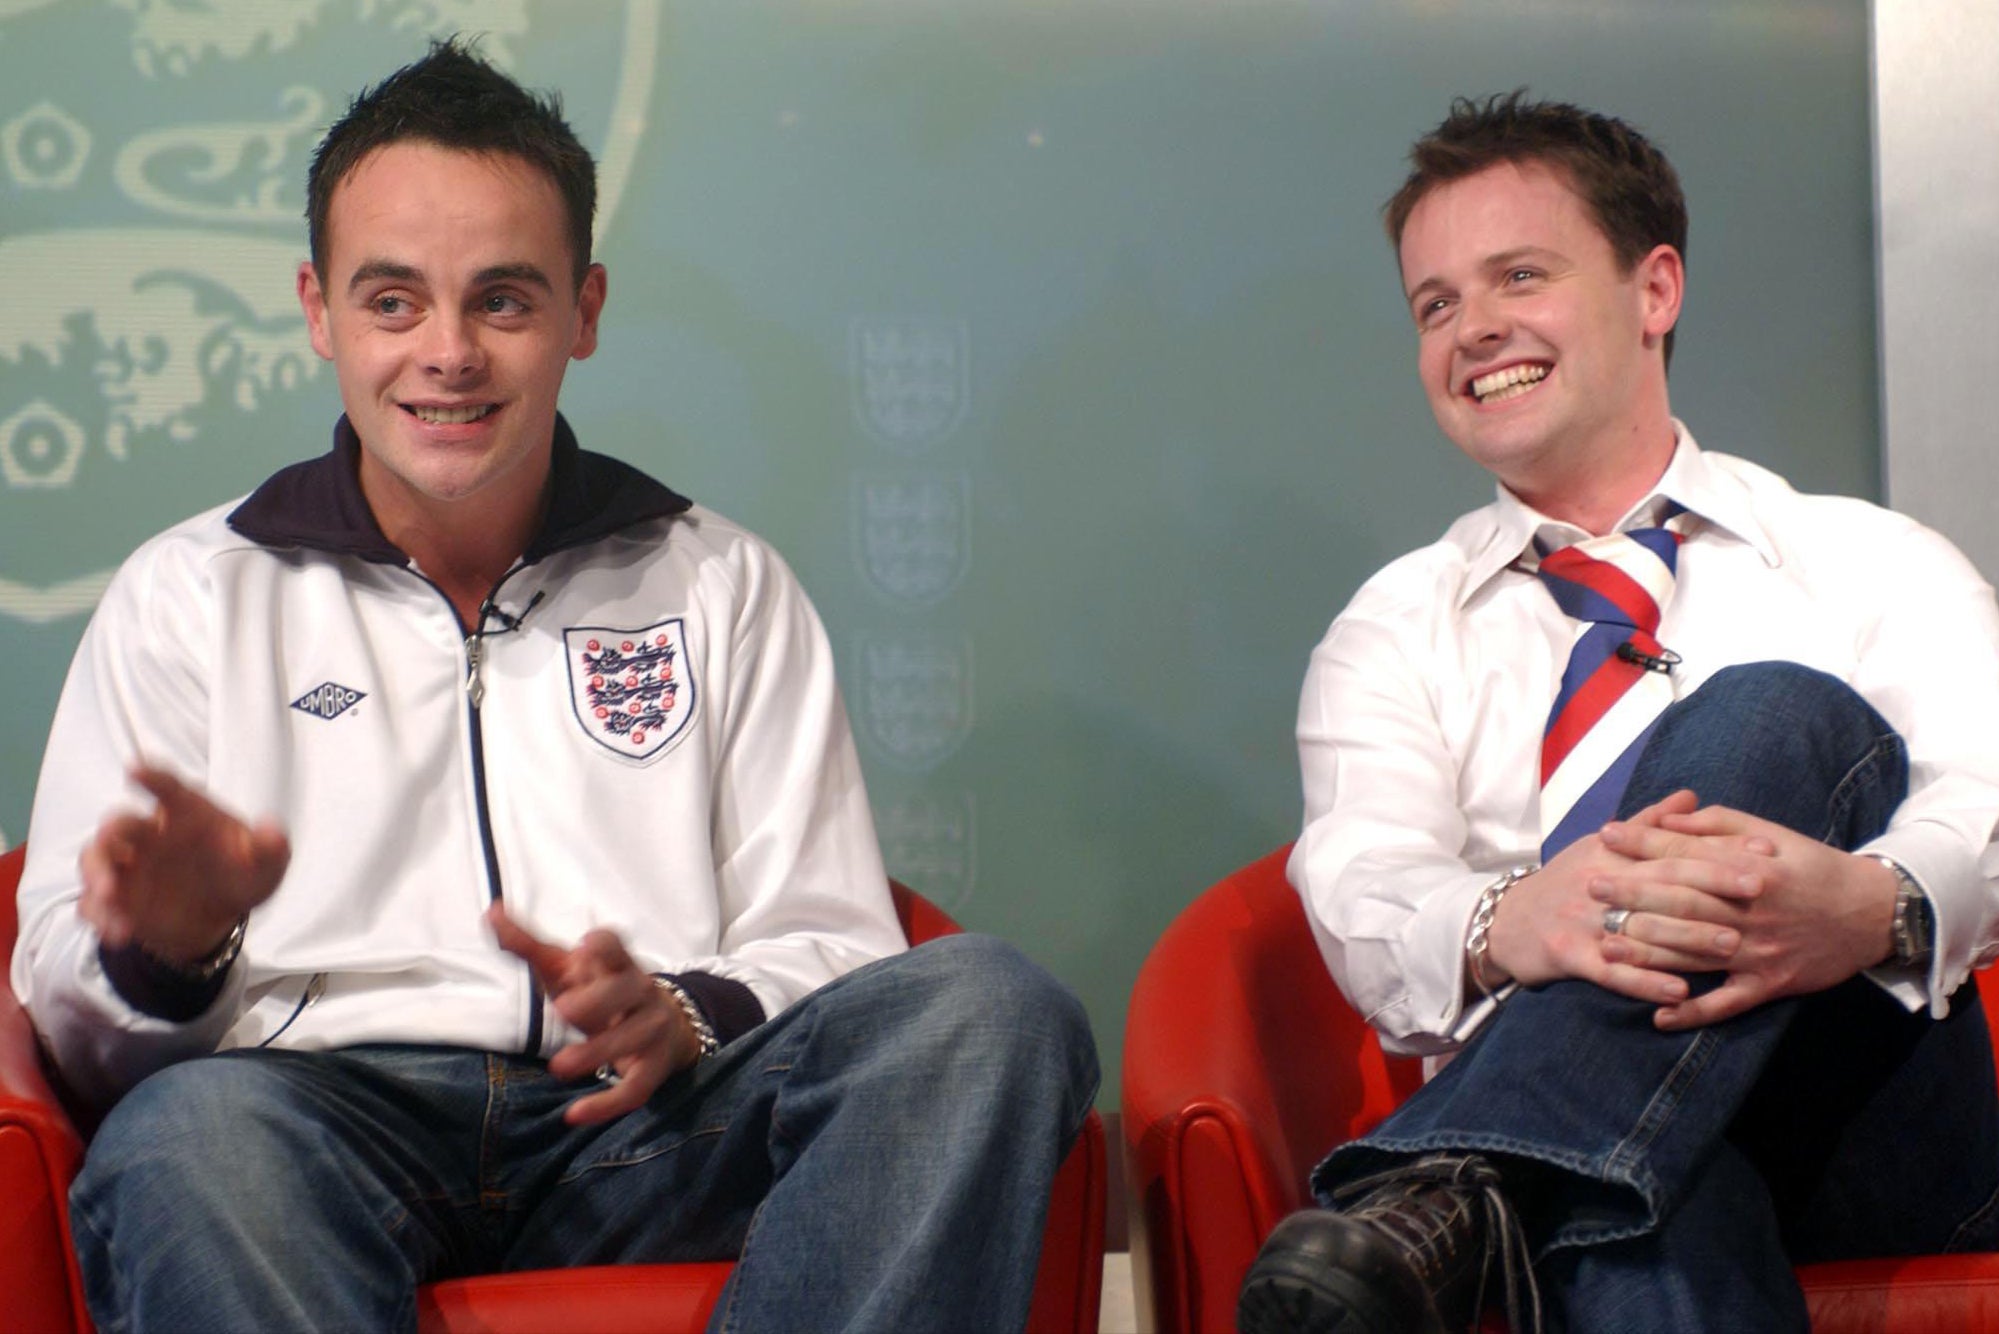 Ant and Dec’s track was given the FA’s seal of approval